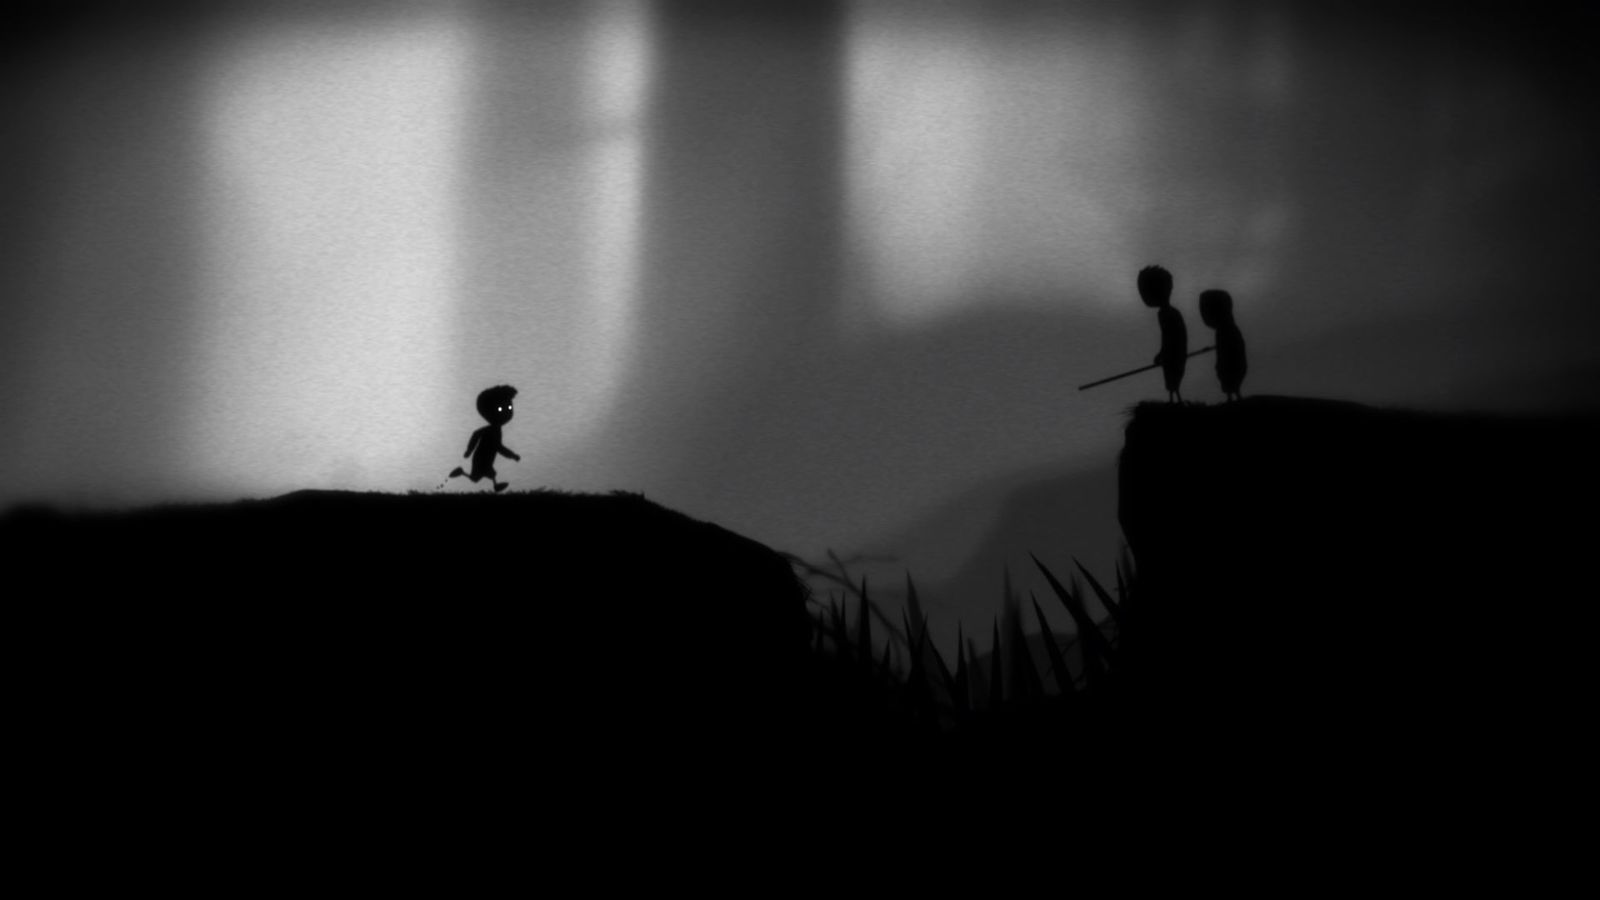 Screenshot from Limbo, showing the protagonist running towards two people on the other side of a gulf